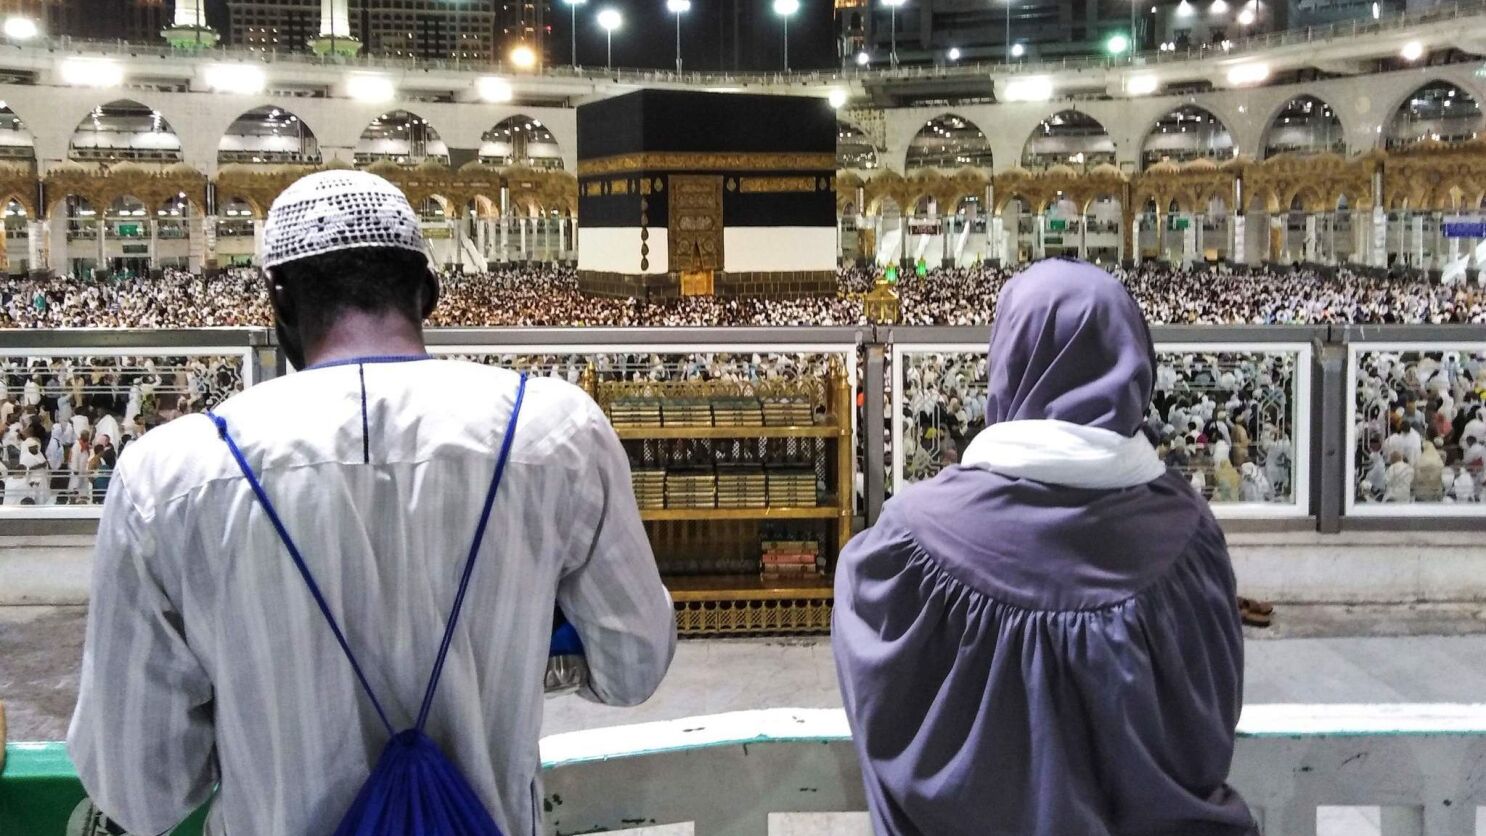 Q&A: The hajj pilgrimage and its significance in Islam - Los Angeles Times